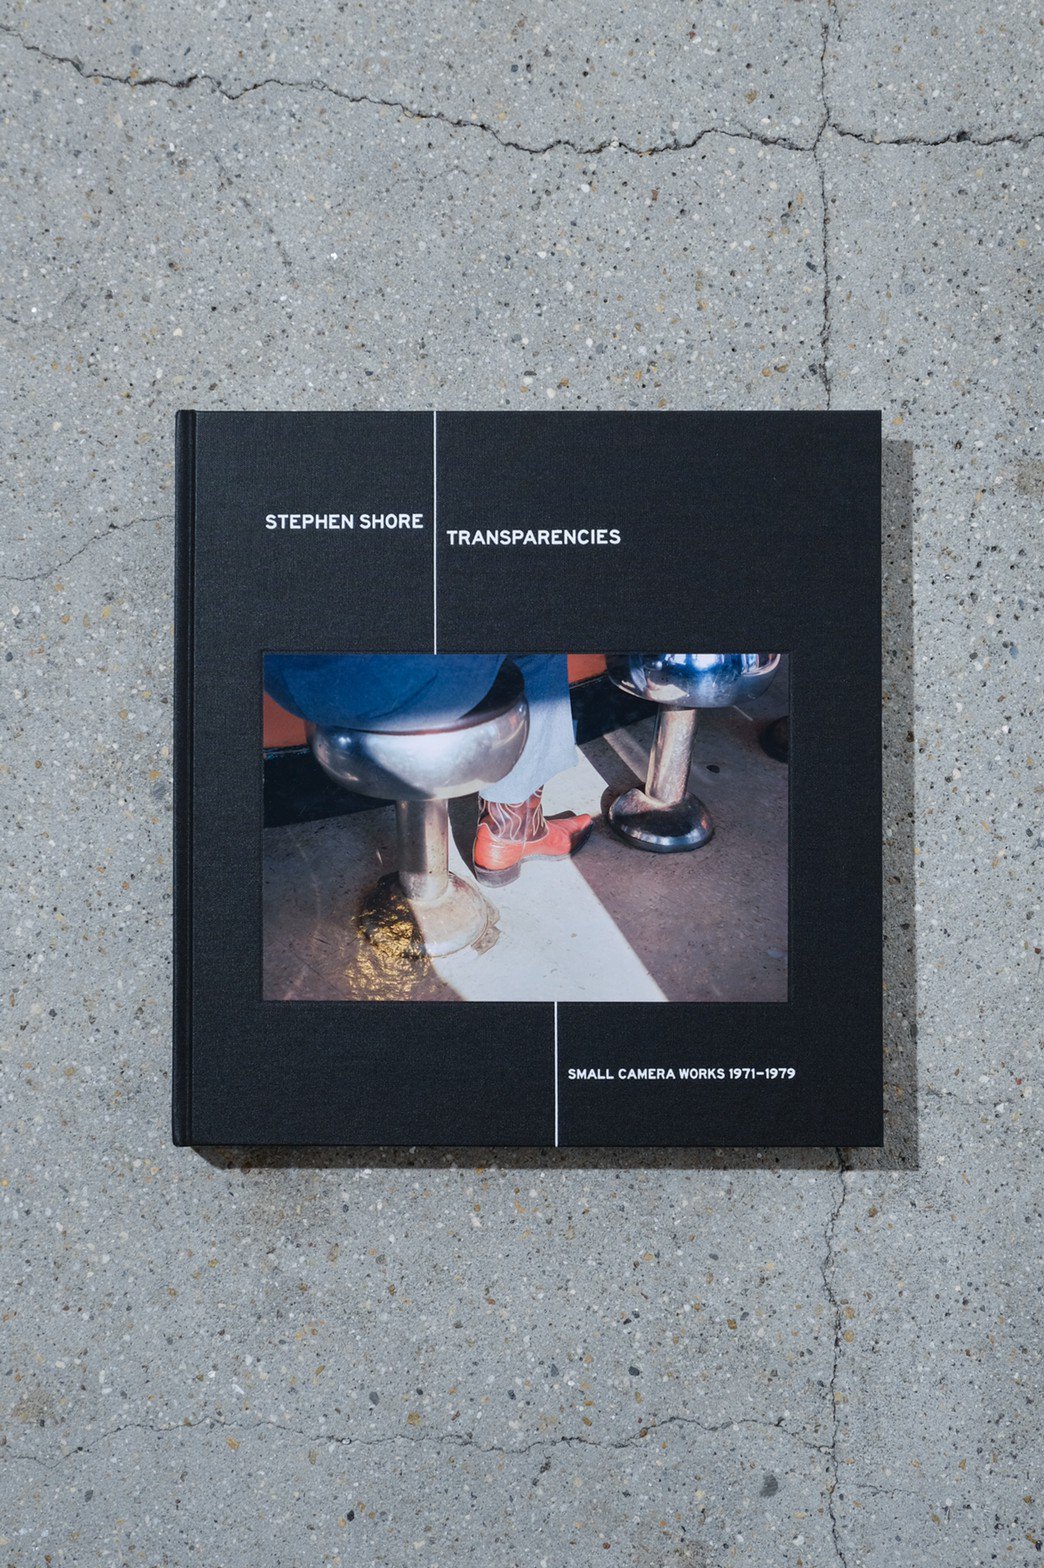 『TRANSPARENCIES:SMALL CAMERA WORKS 1971-1979』by Stephen Shore